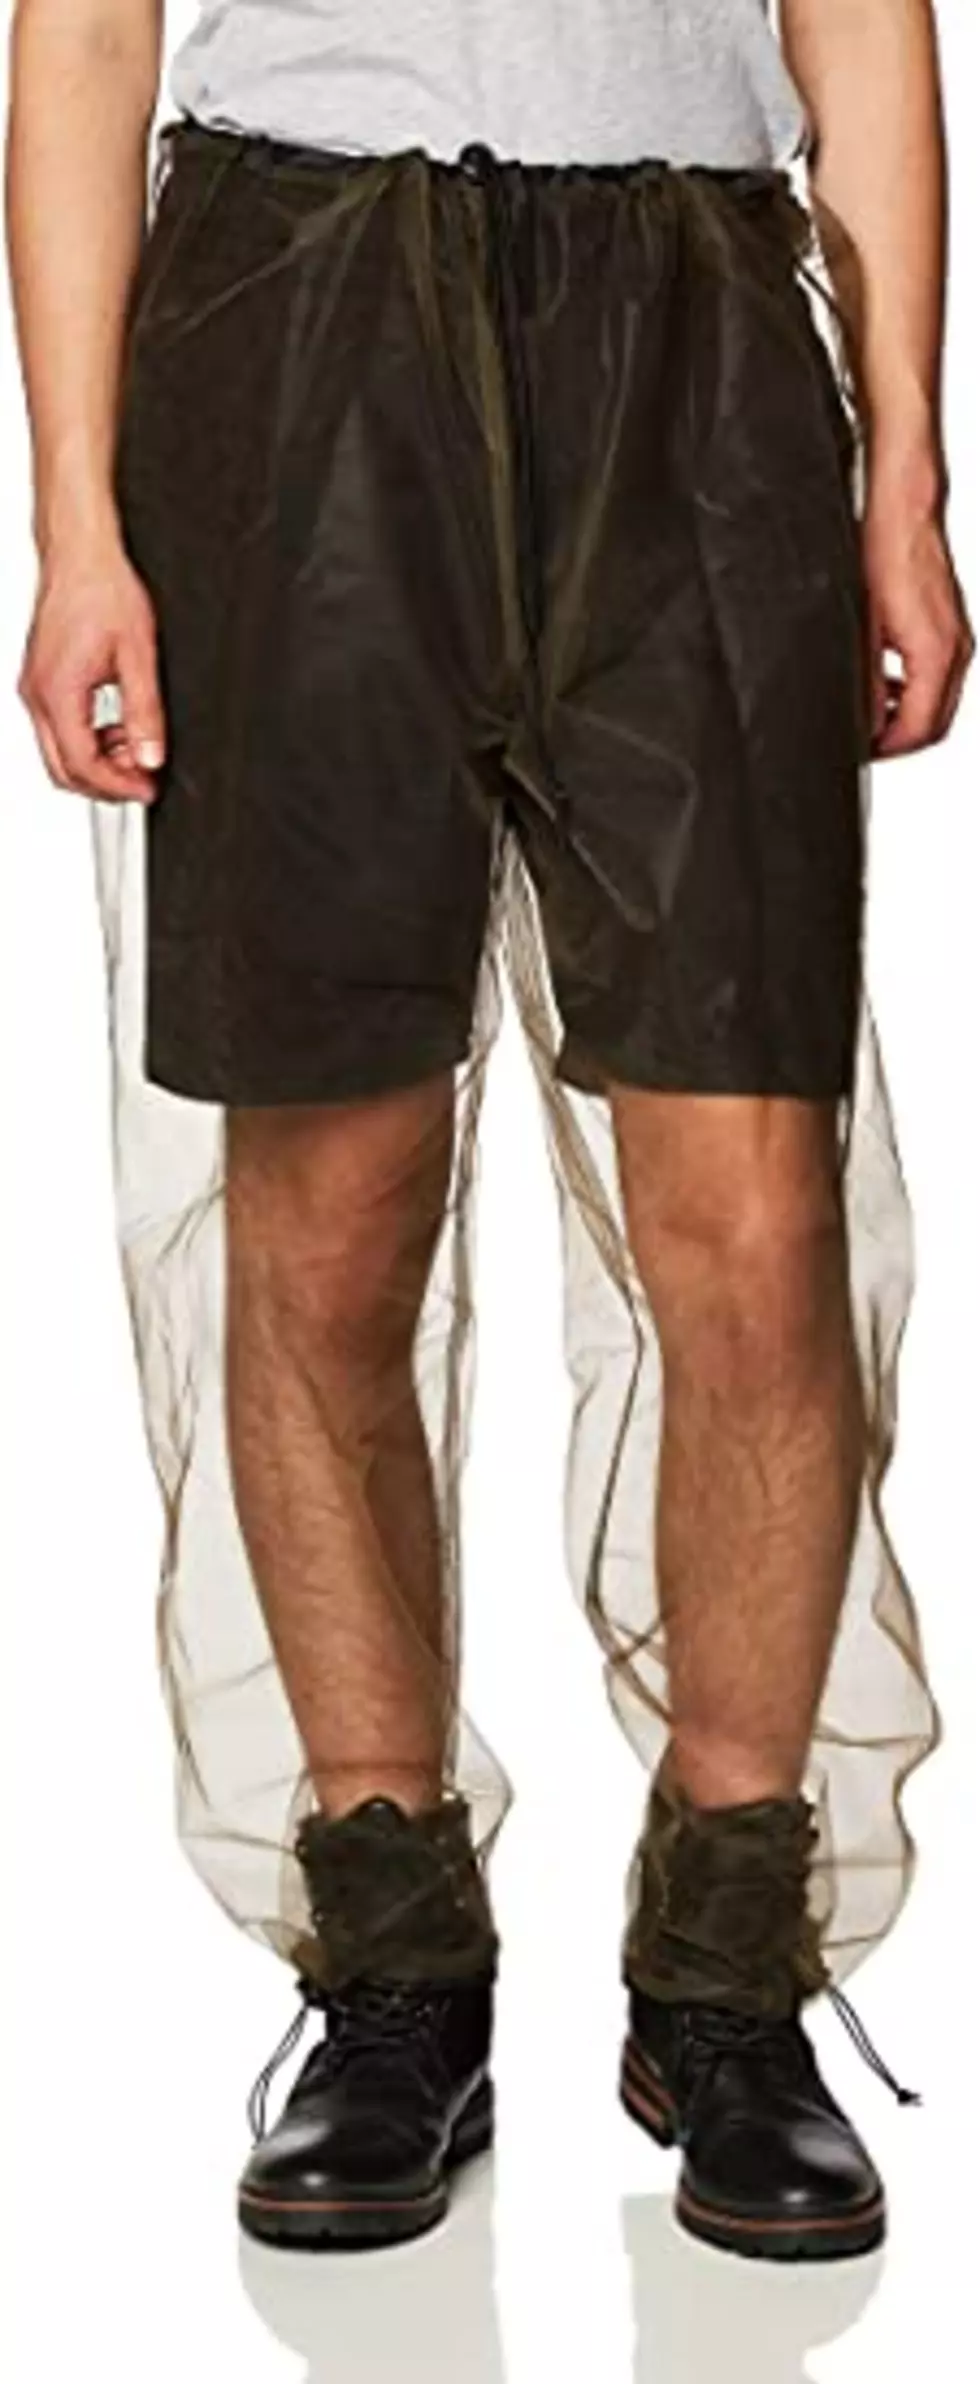 Would You Dare To Wear These Ultra Sexy Mosquito Net Pants?